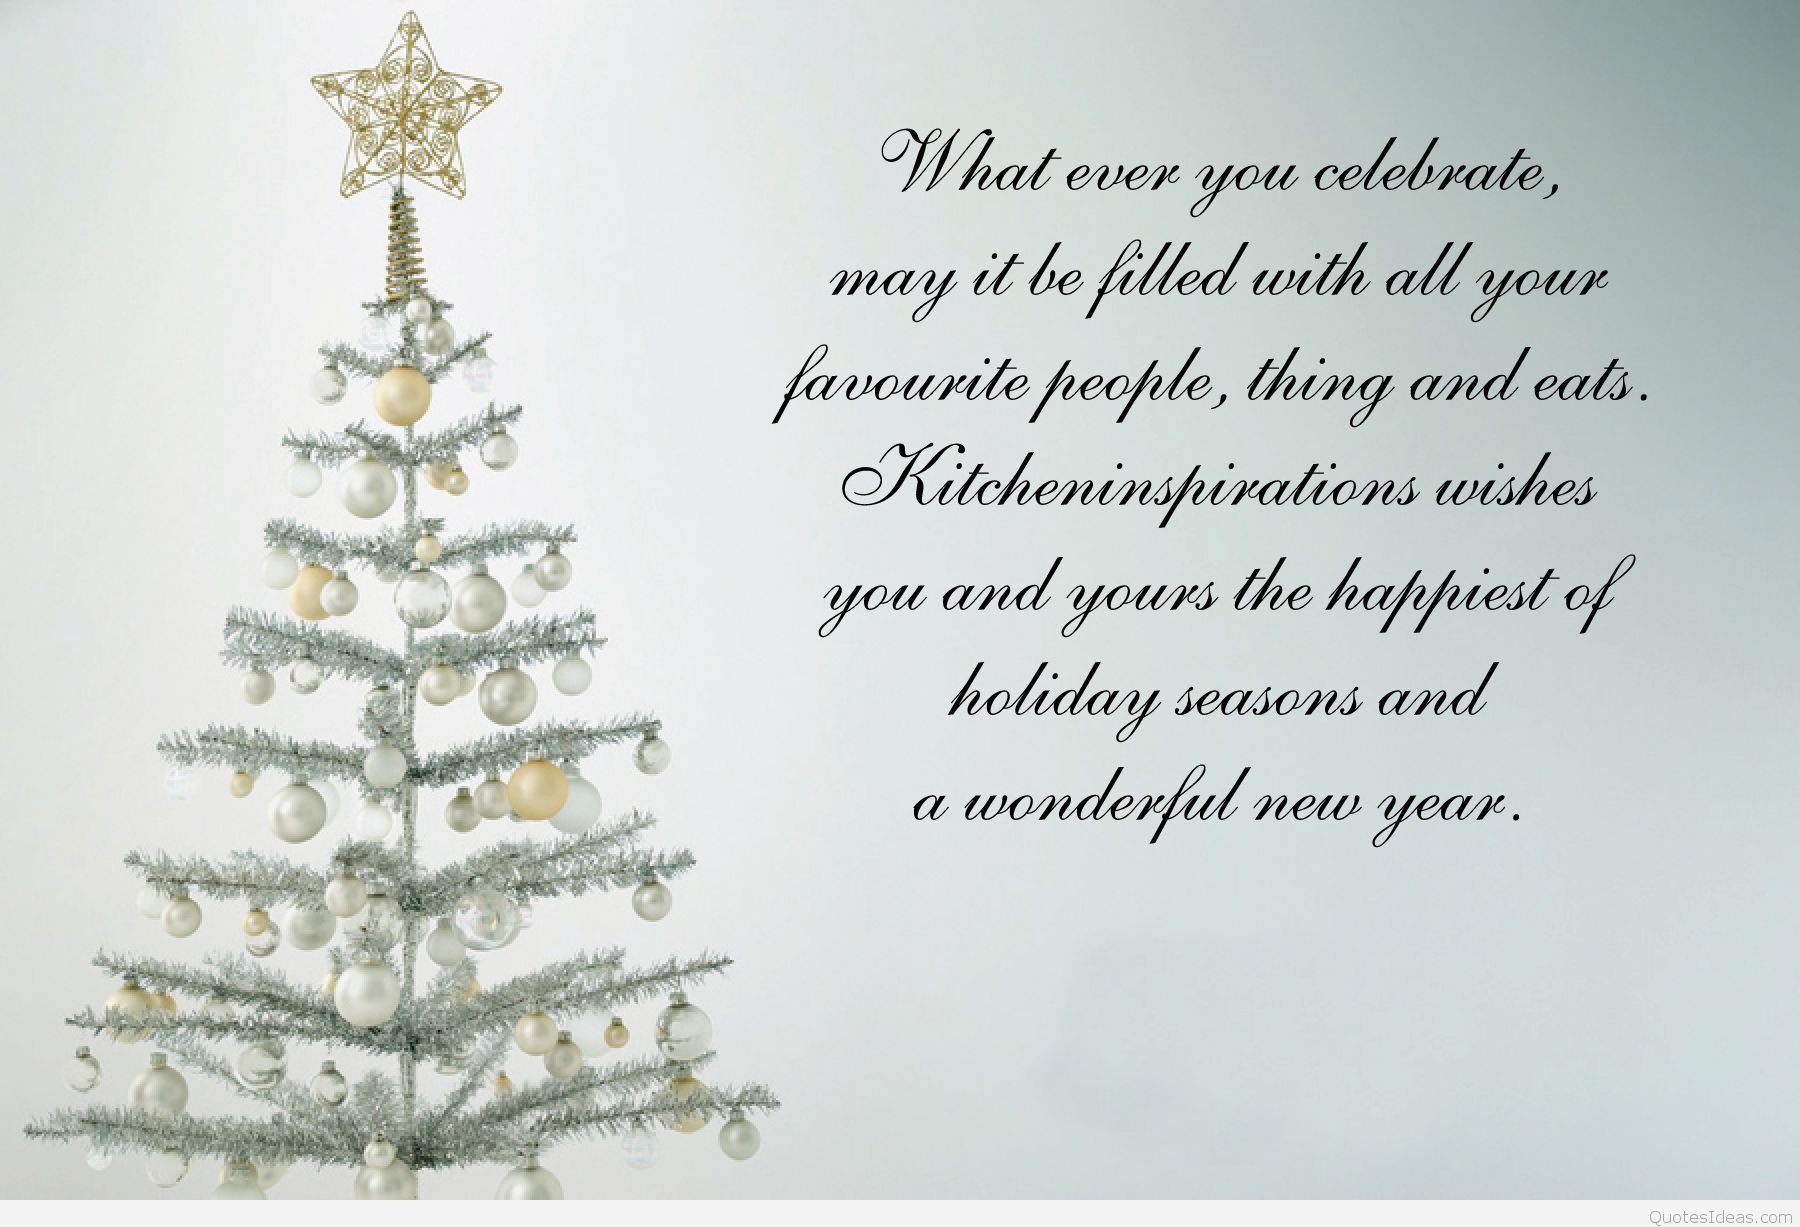 Christmas Quote Wallpaper Free Christmas Quote Background